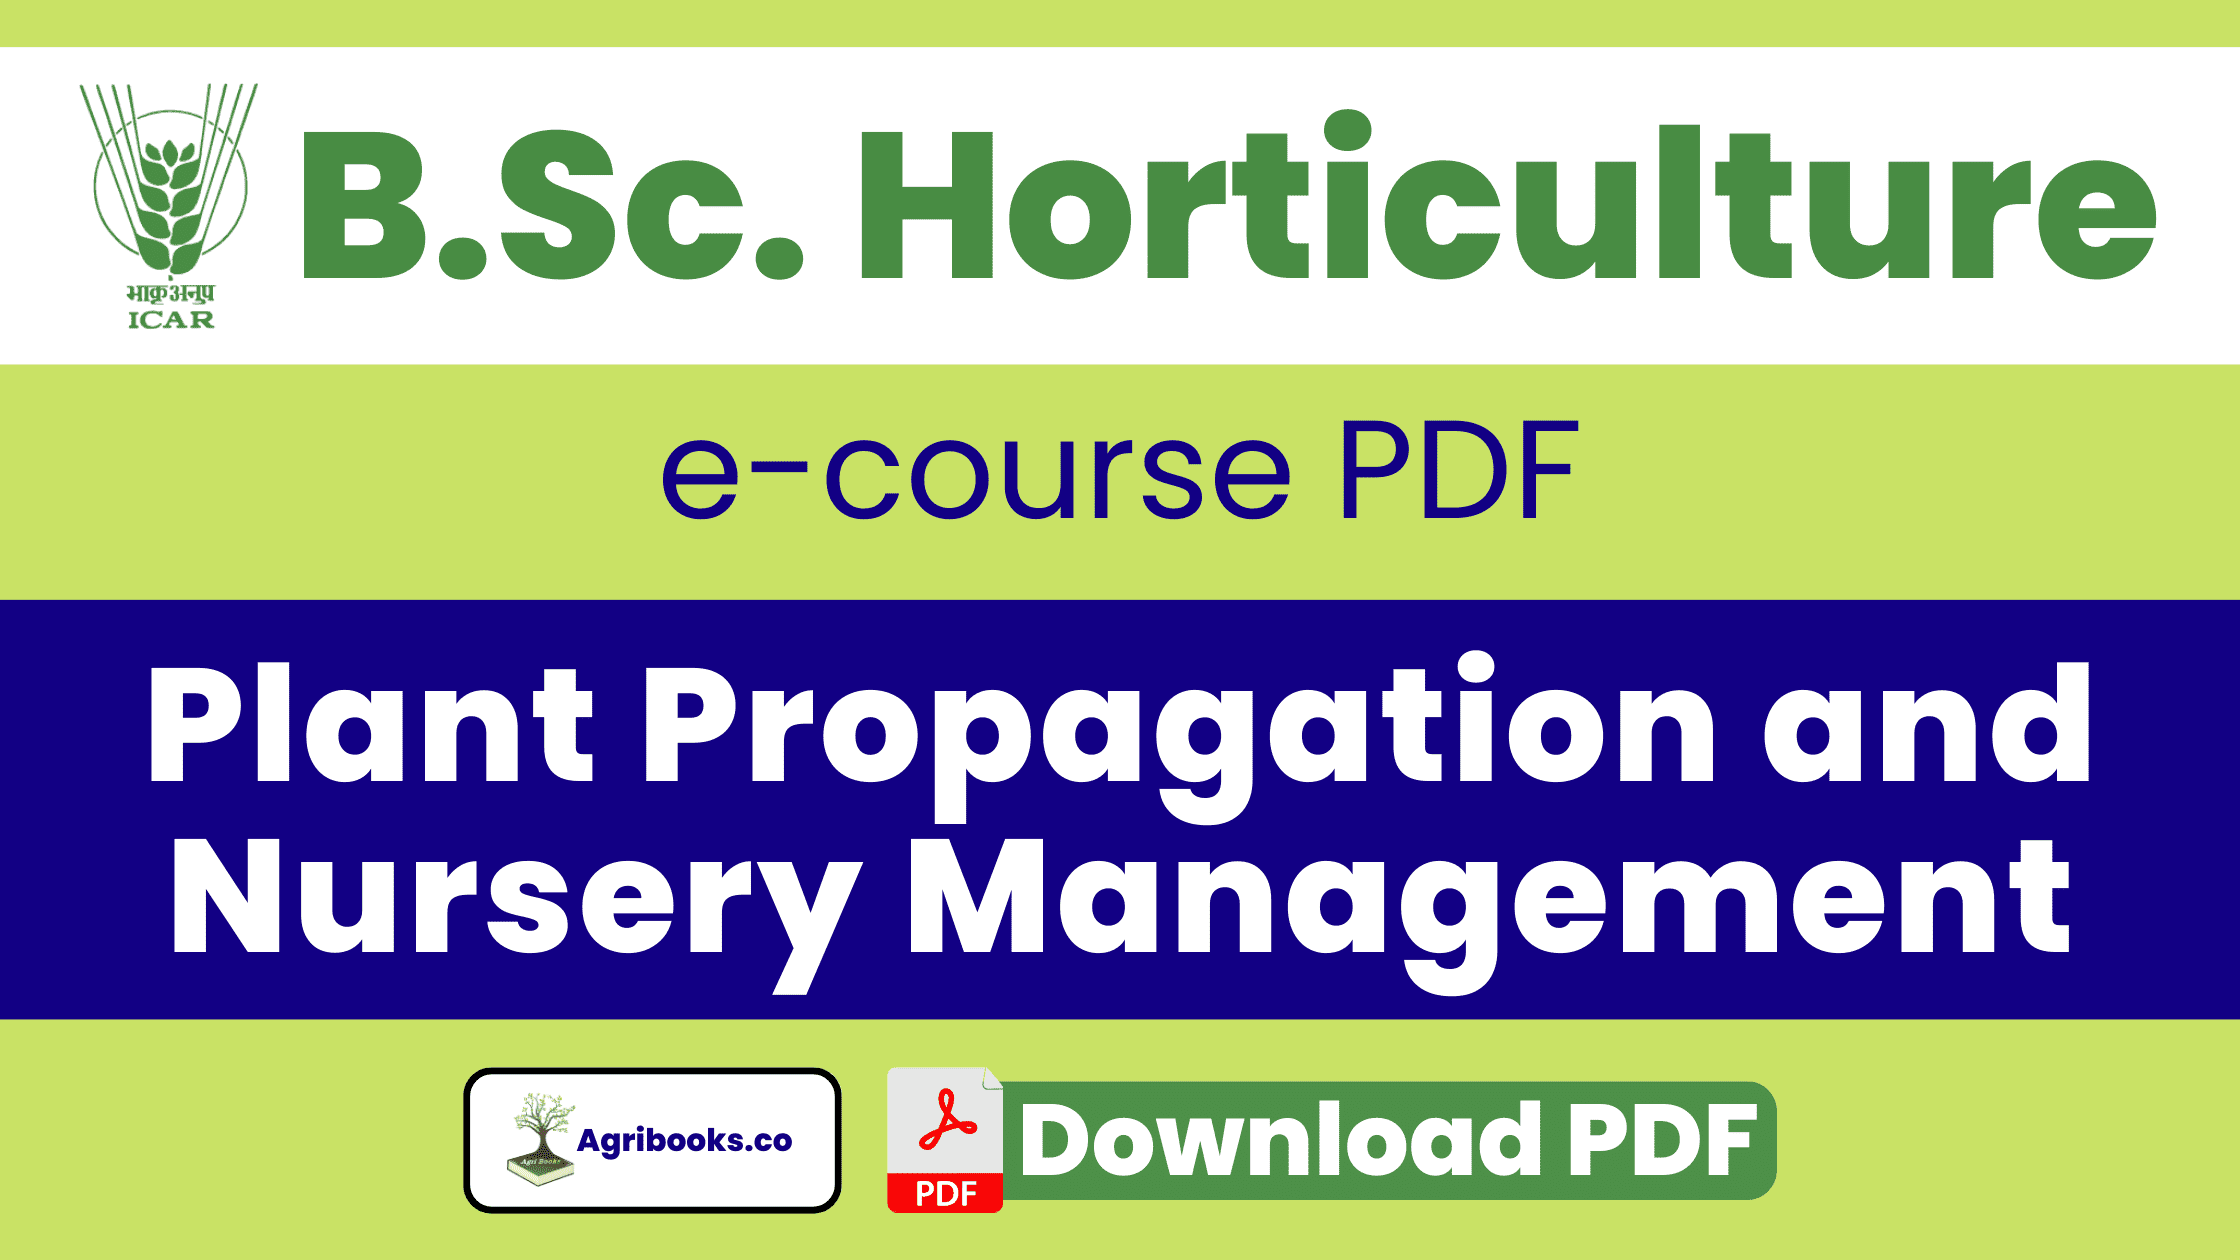 Plant Propagation and Nursery Management BSc Horticulture PDF Download